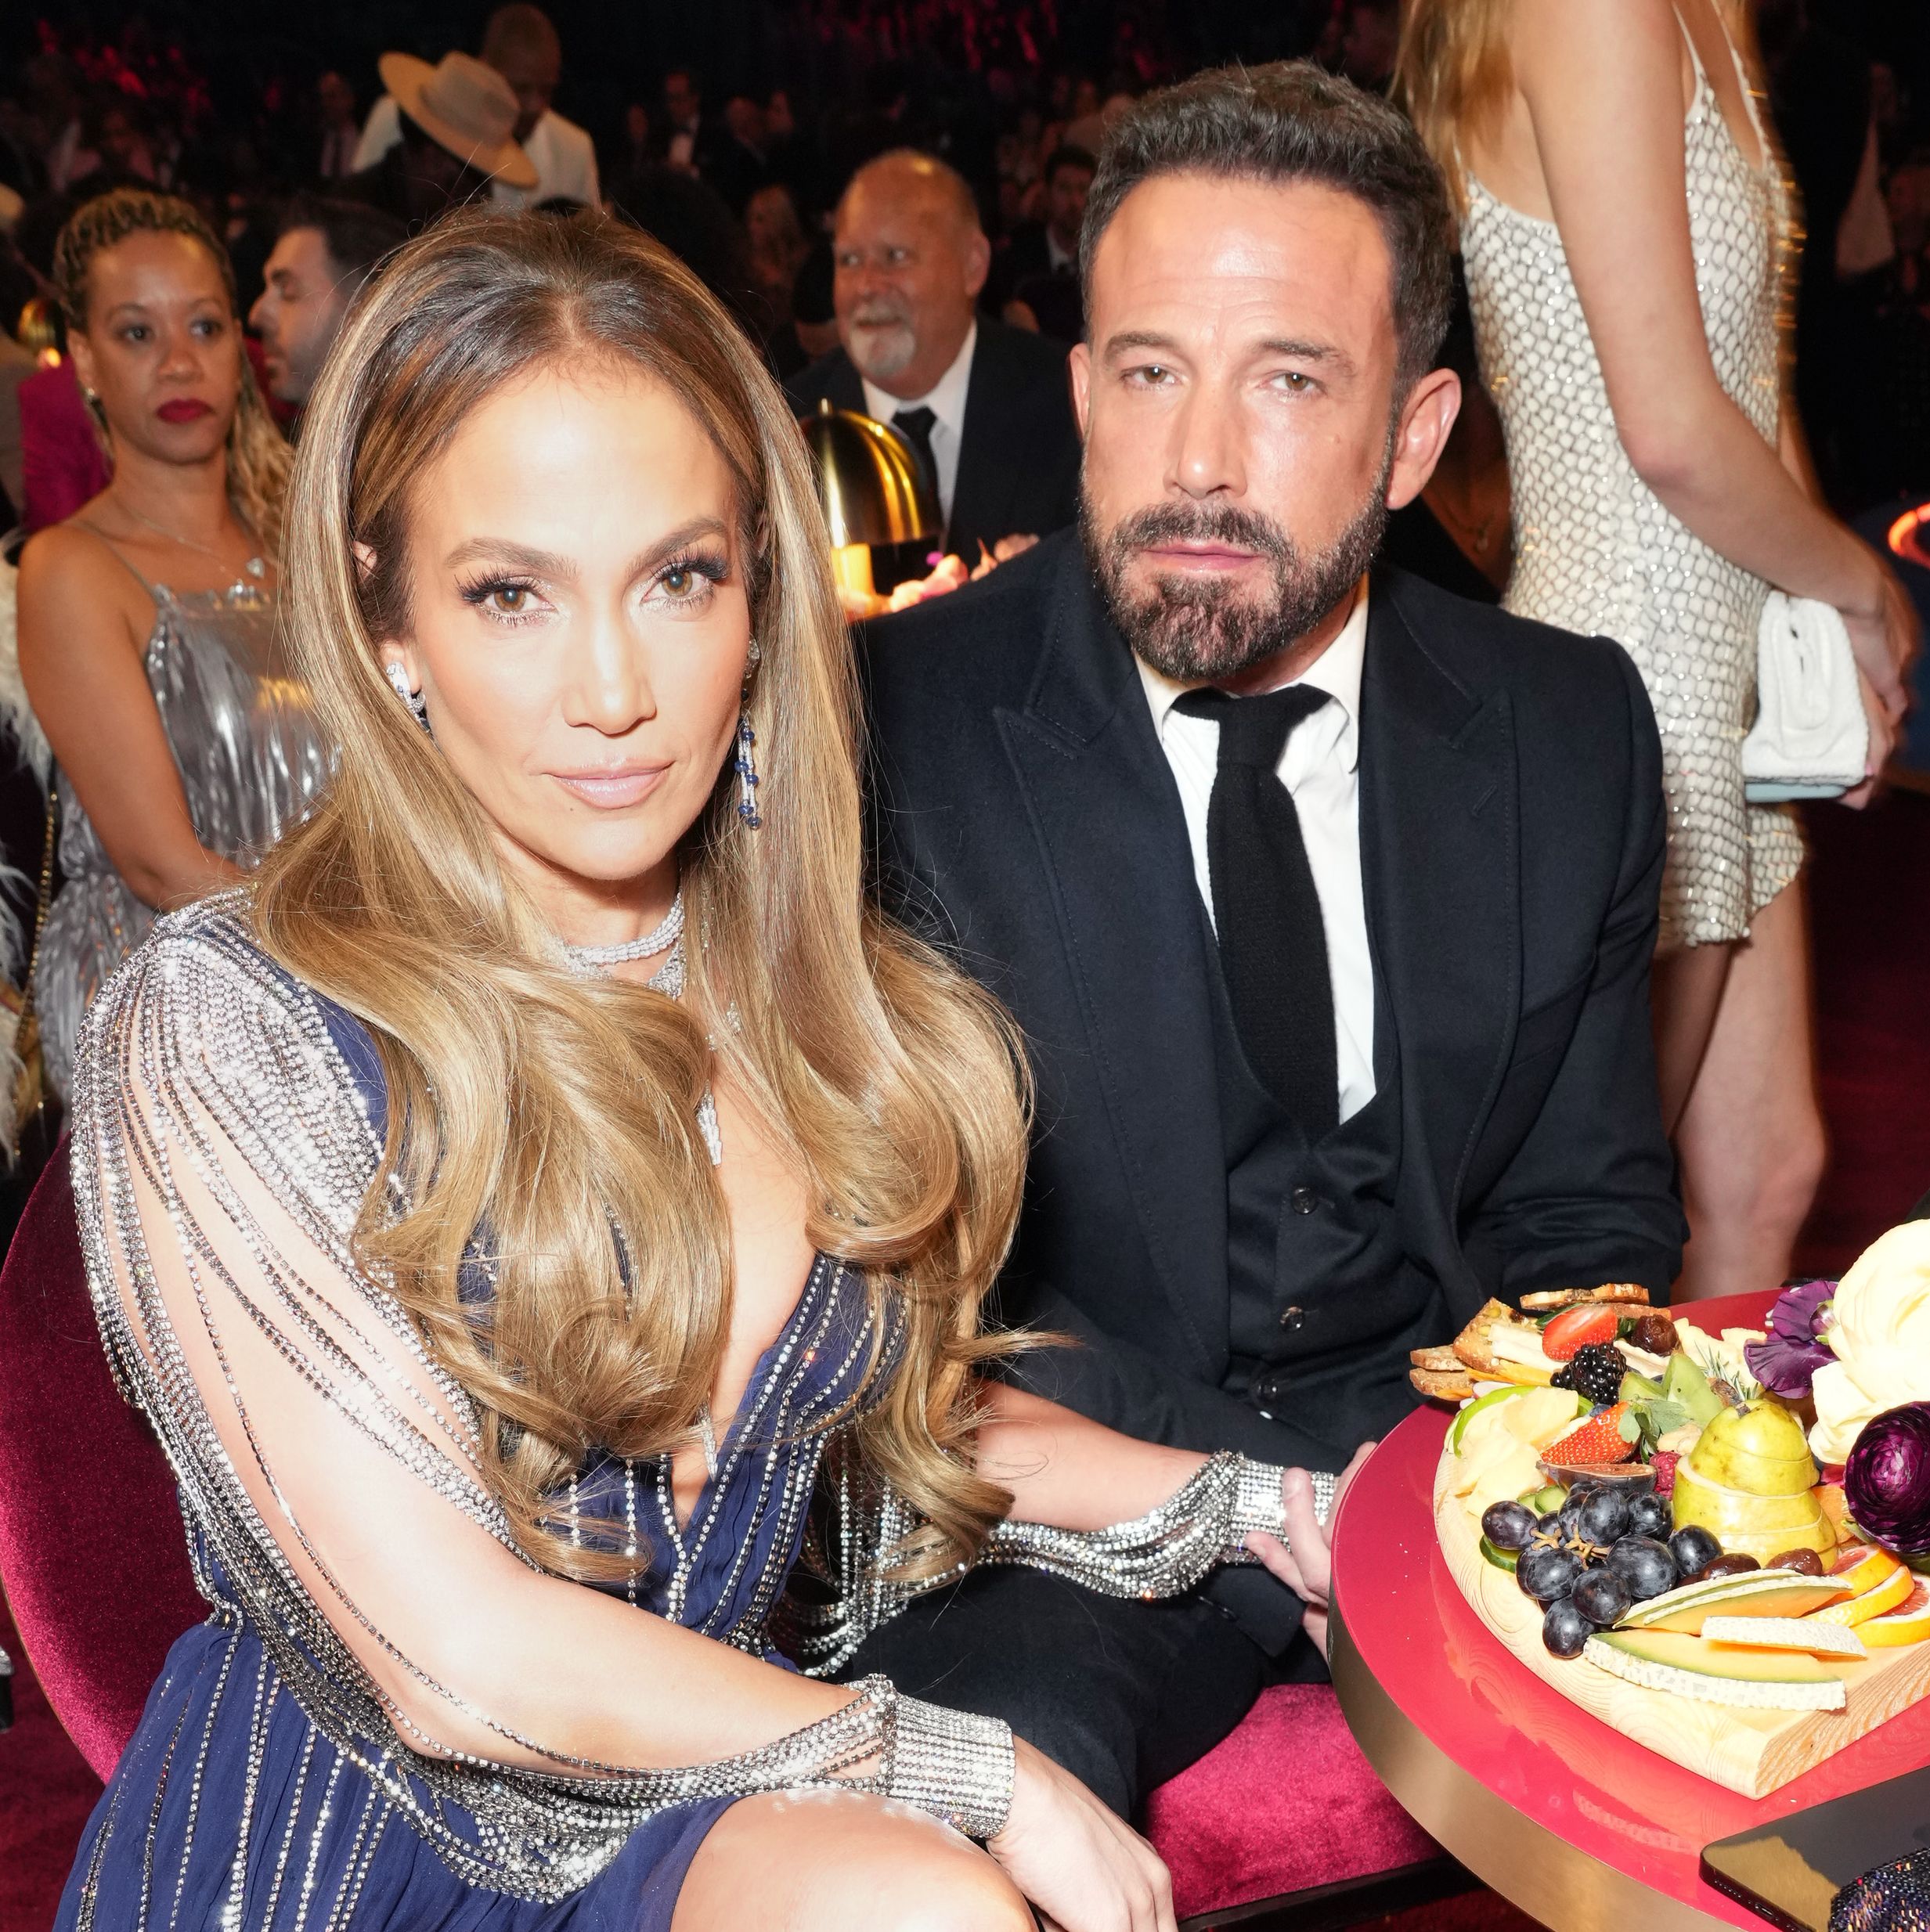 Why Ben Affleck Looked So Miserable at the 2023 Grammys: 'He Wasn't His Usual Self'